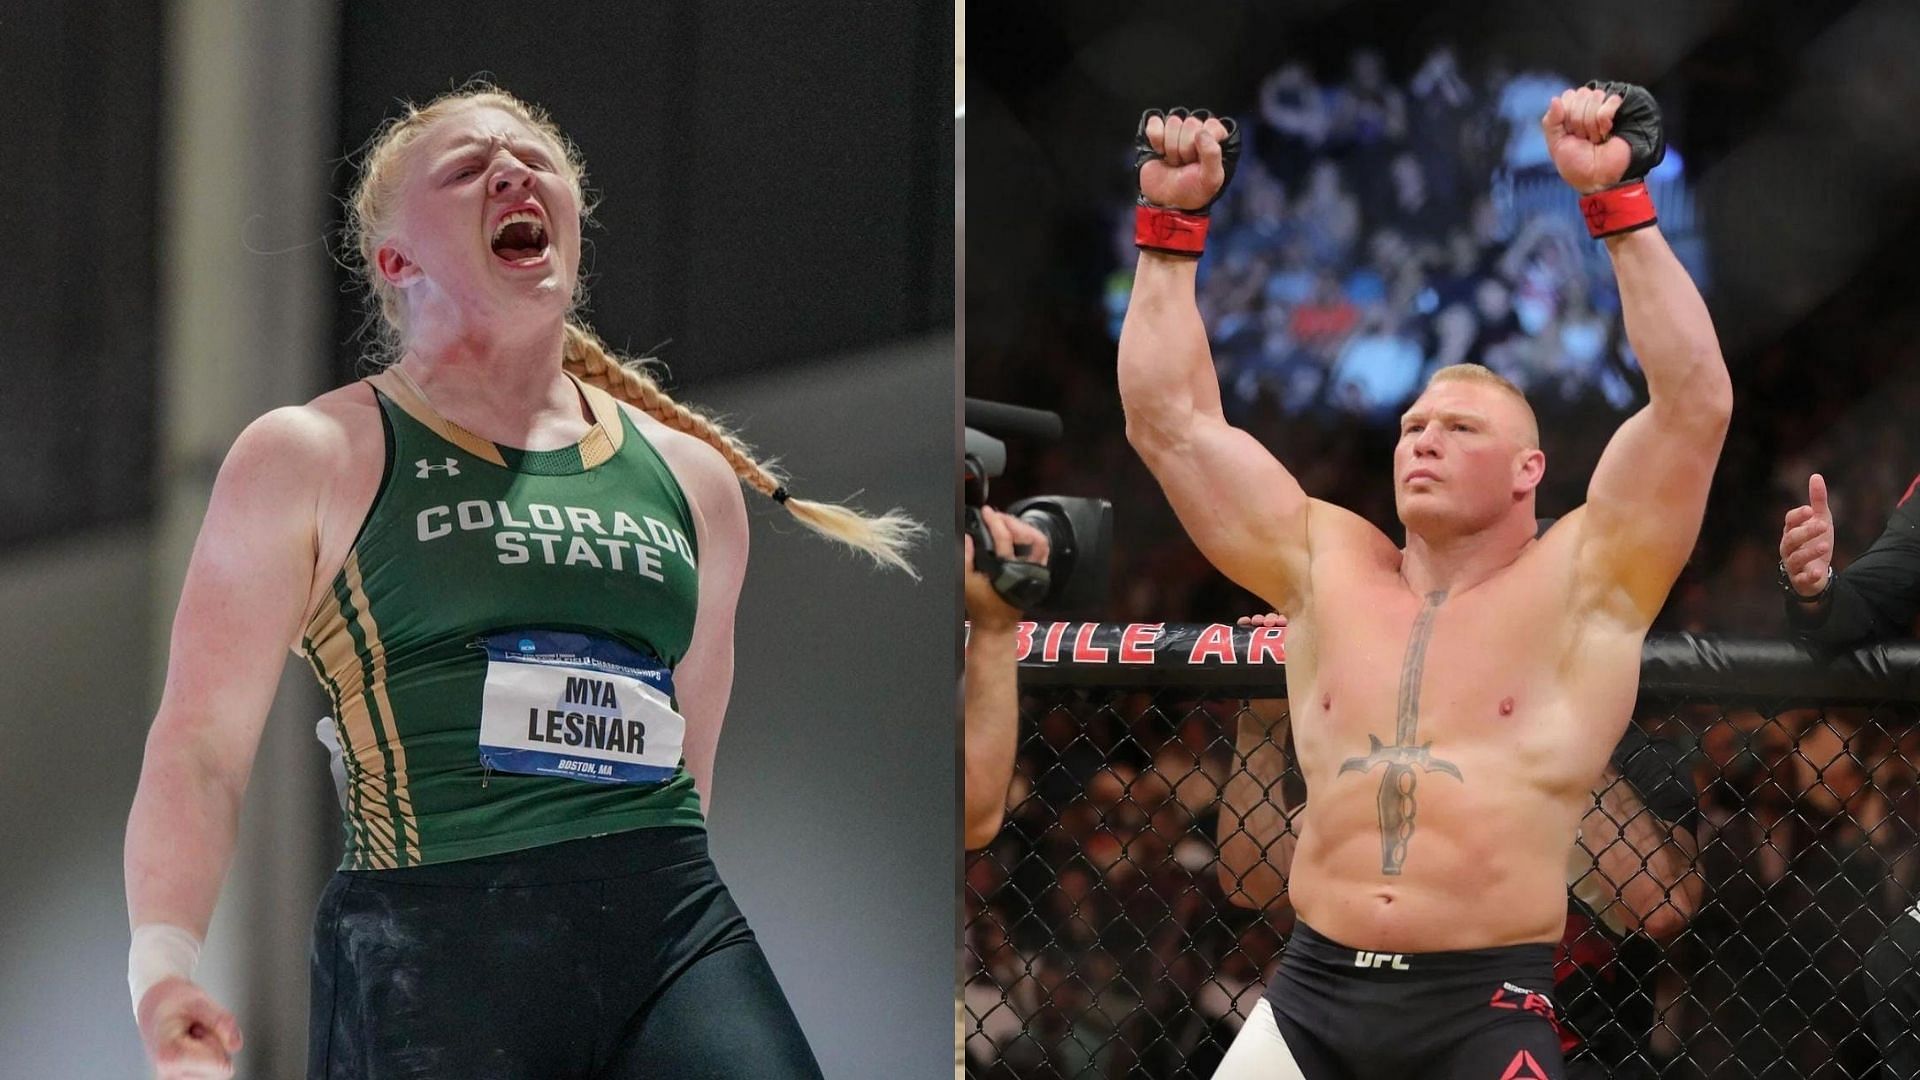 Mya Lesnar (L) and her father Brock Lesnar (R)